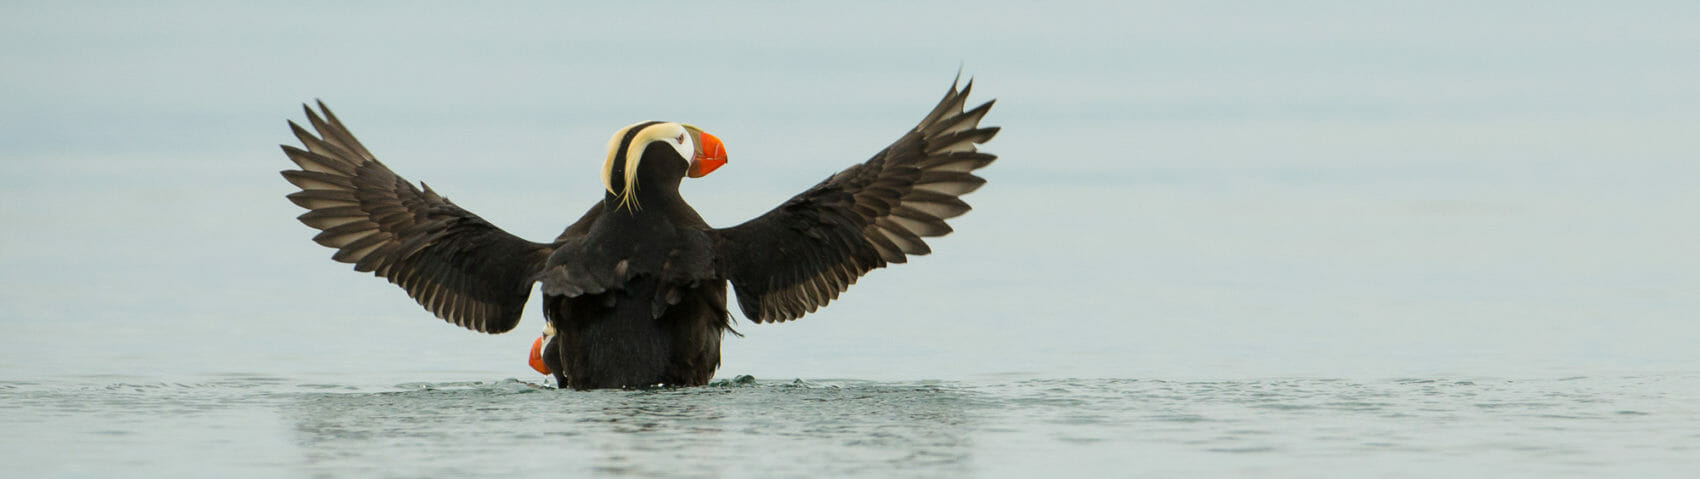 tufted puffin with outstretched wings in Alaska. Mario Davalos photo